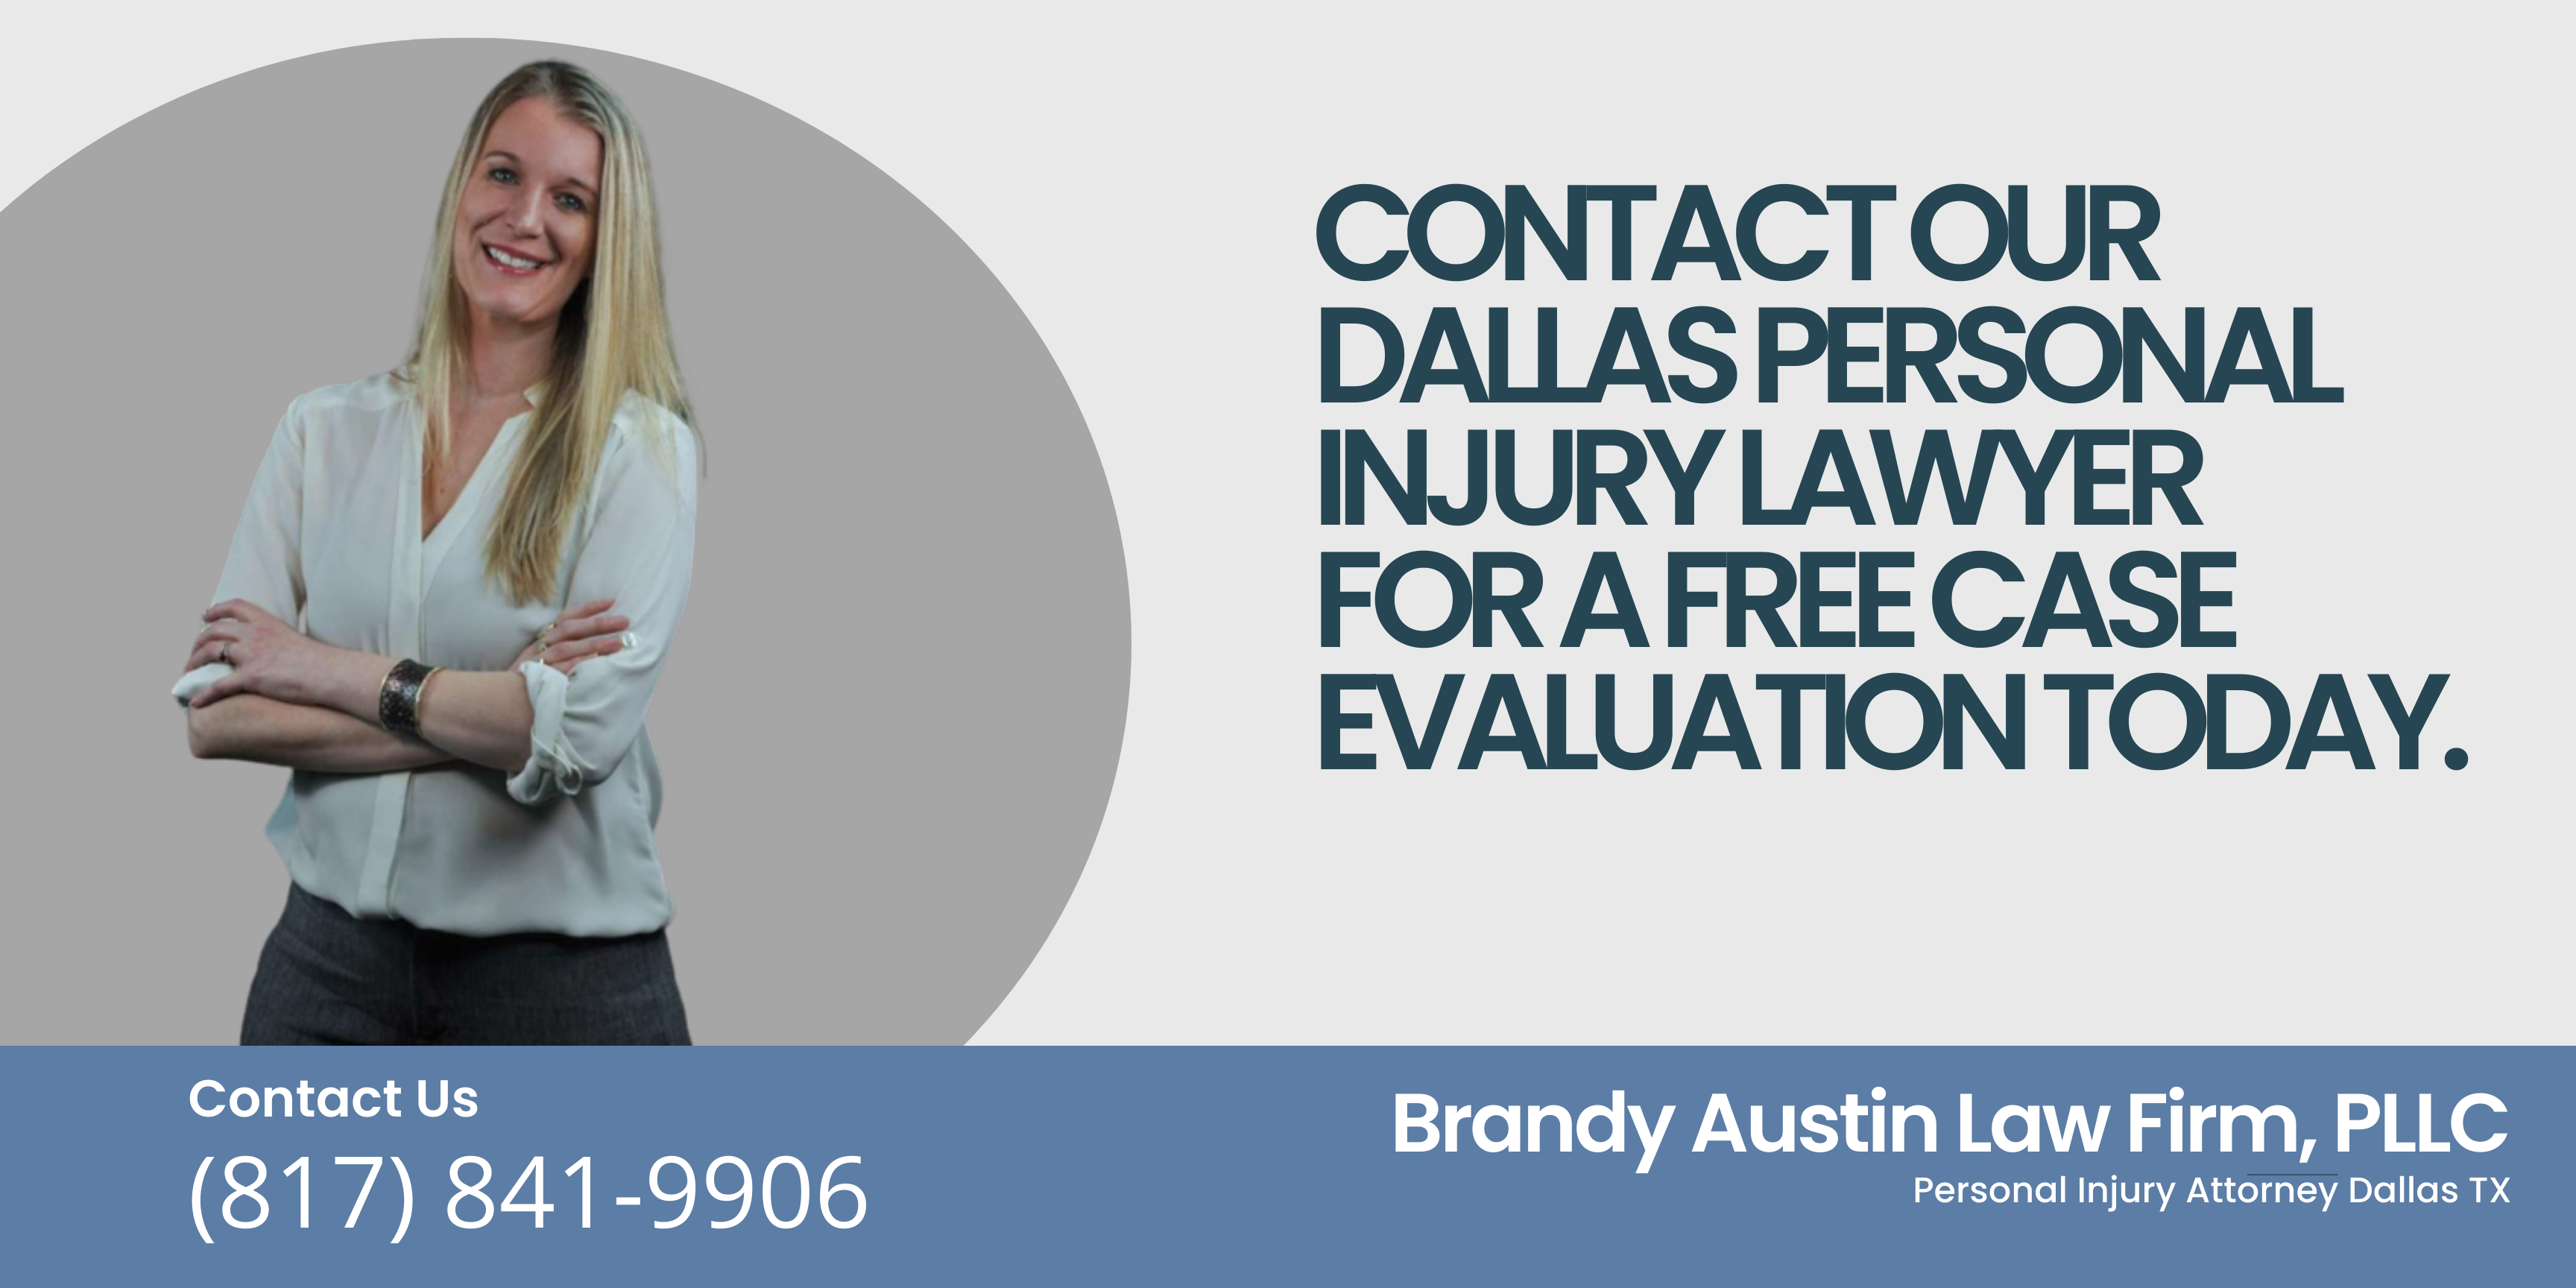 Contact our Dallas Texas Personal Injury Lawyer